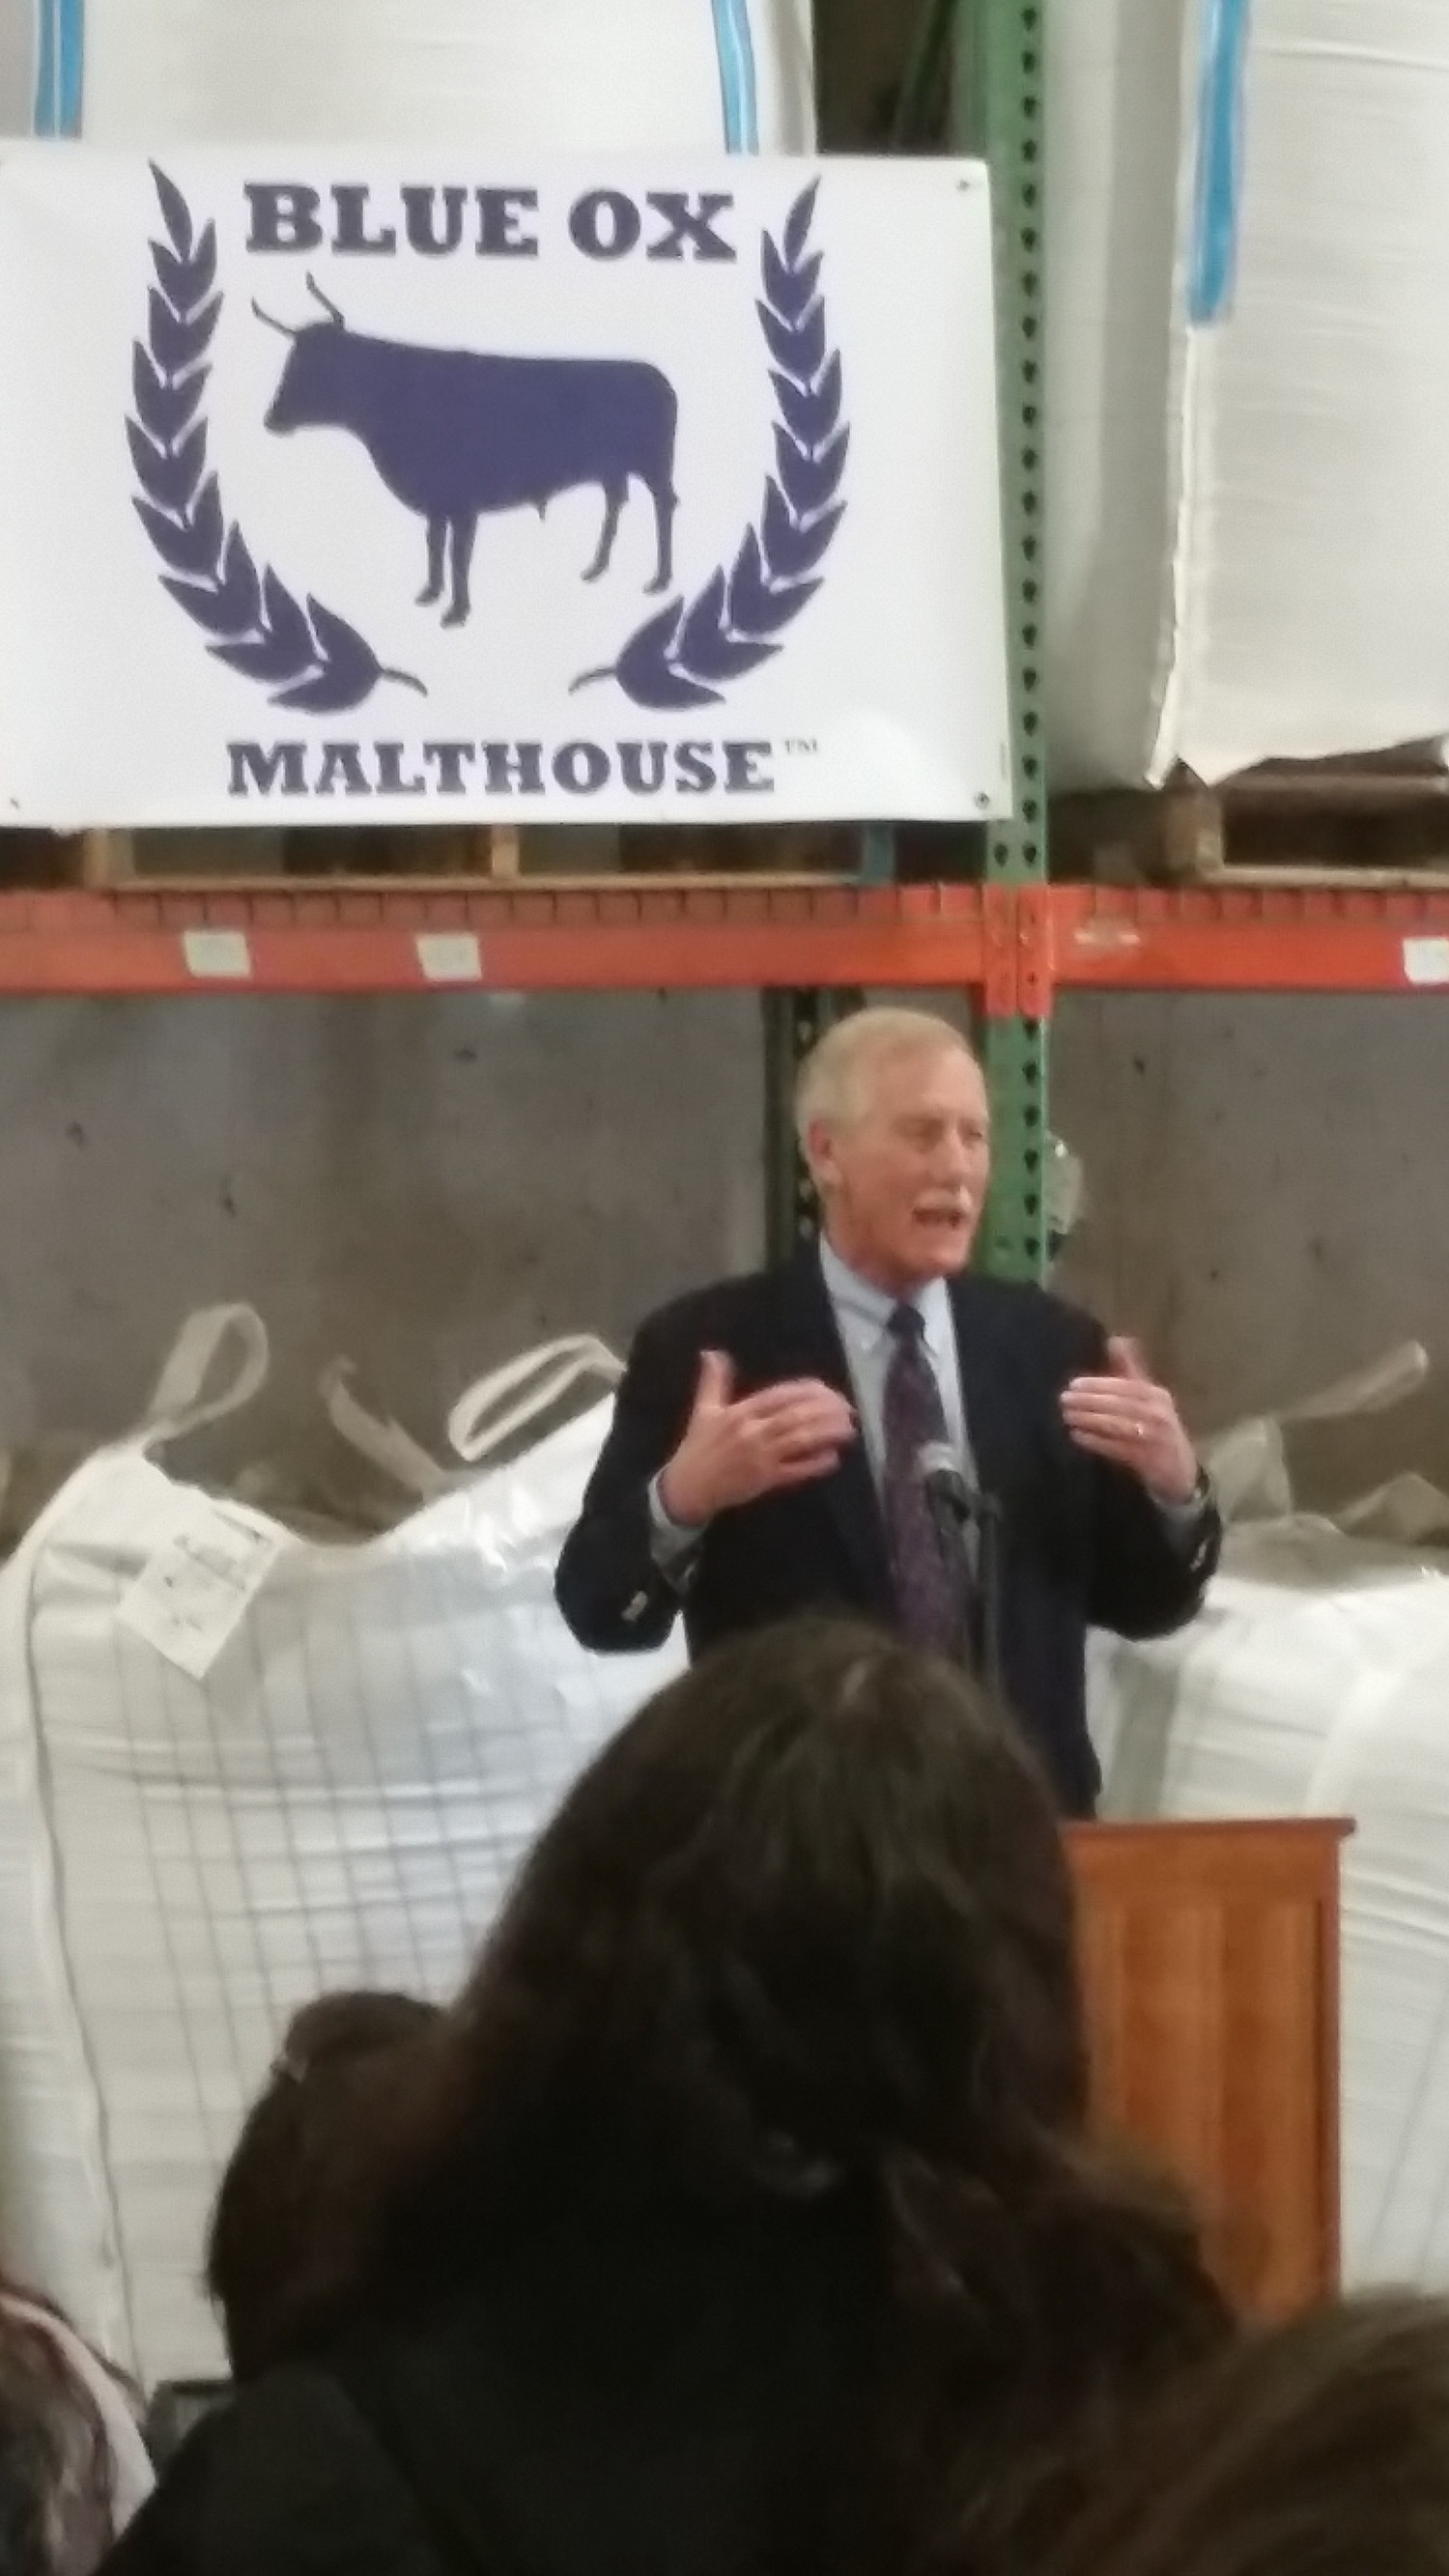  Senator Angus King told the crowd how important it is for Maine to have value-added processing of local grown products to stay in the state as Maine industries. Blue Ox Malthouse is a perfect example of addressing this need.&nbsp; 